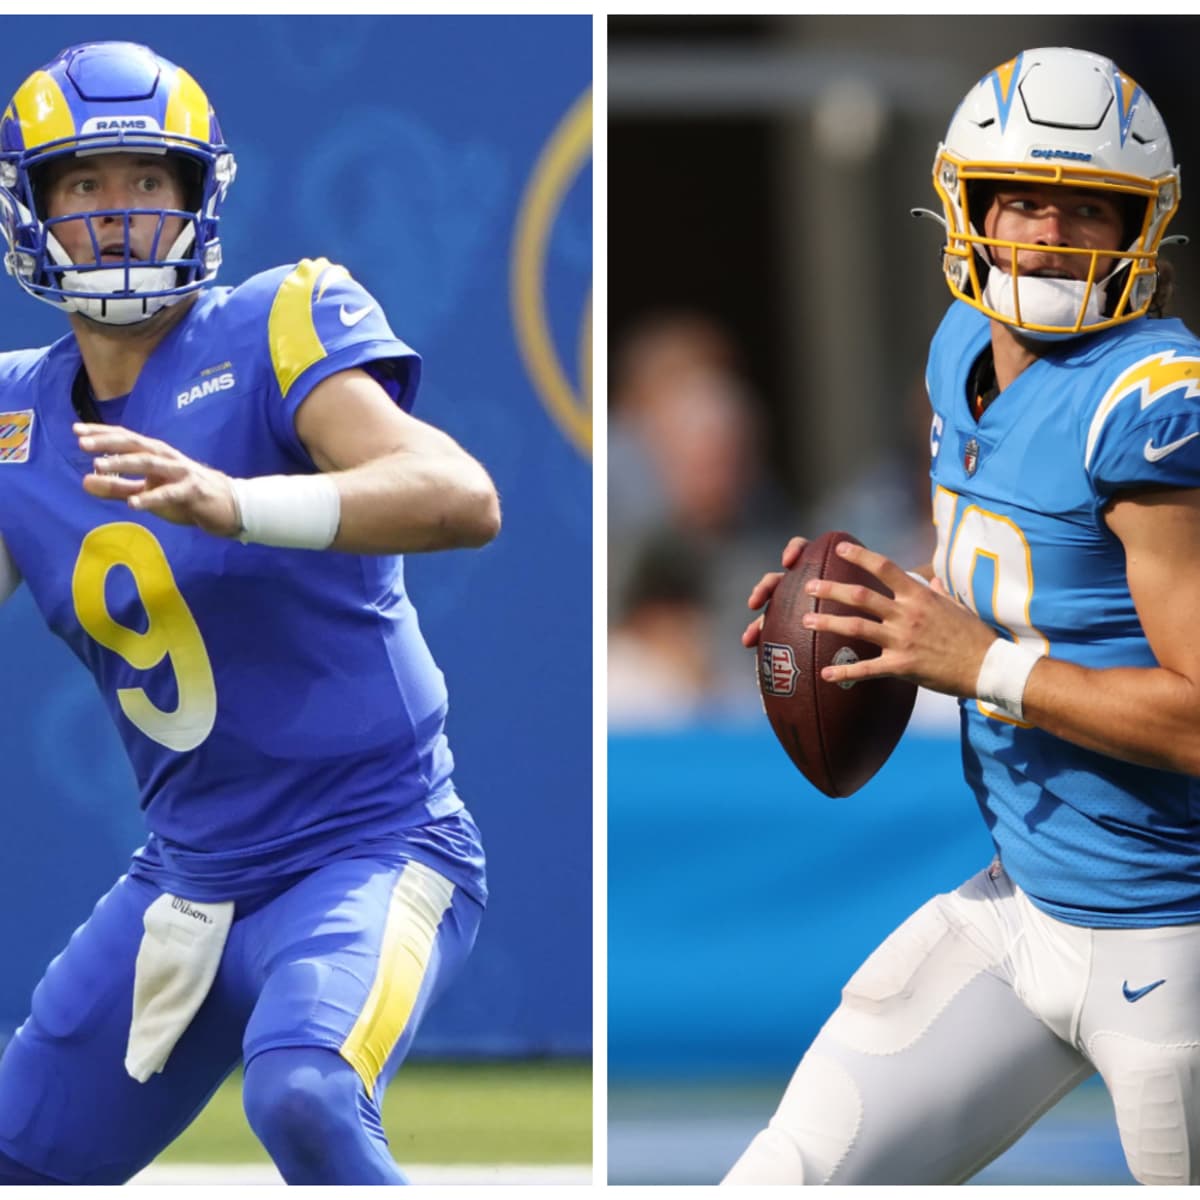 Are the LA Rams uniforms really the ugliest in the NFL?